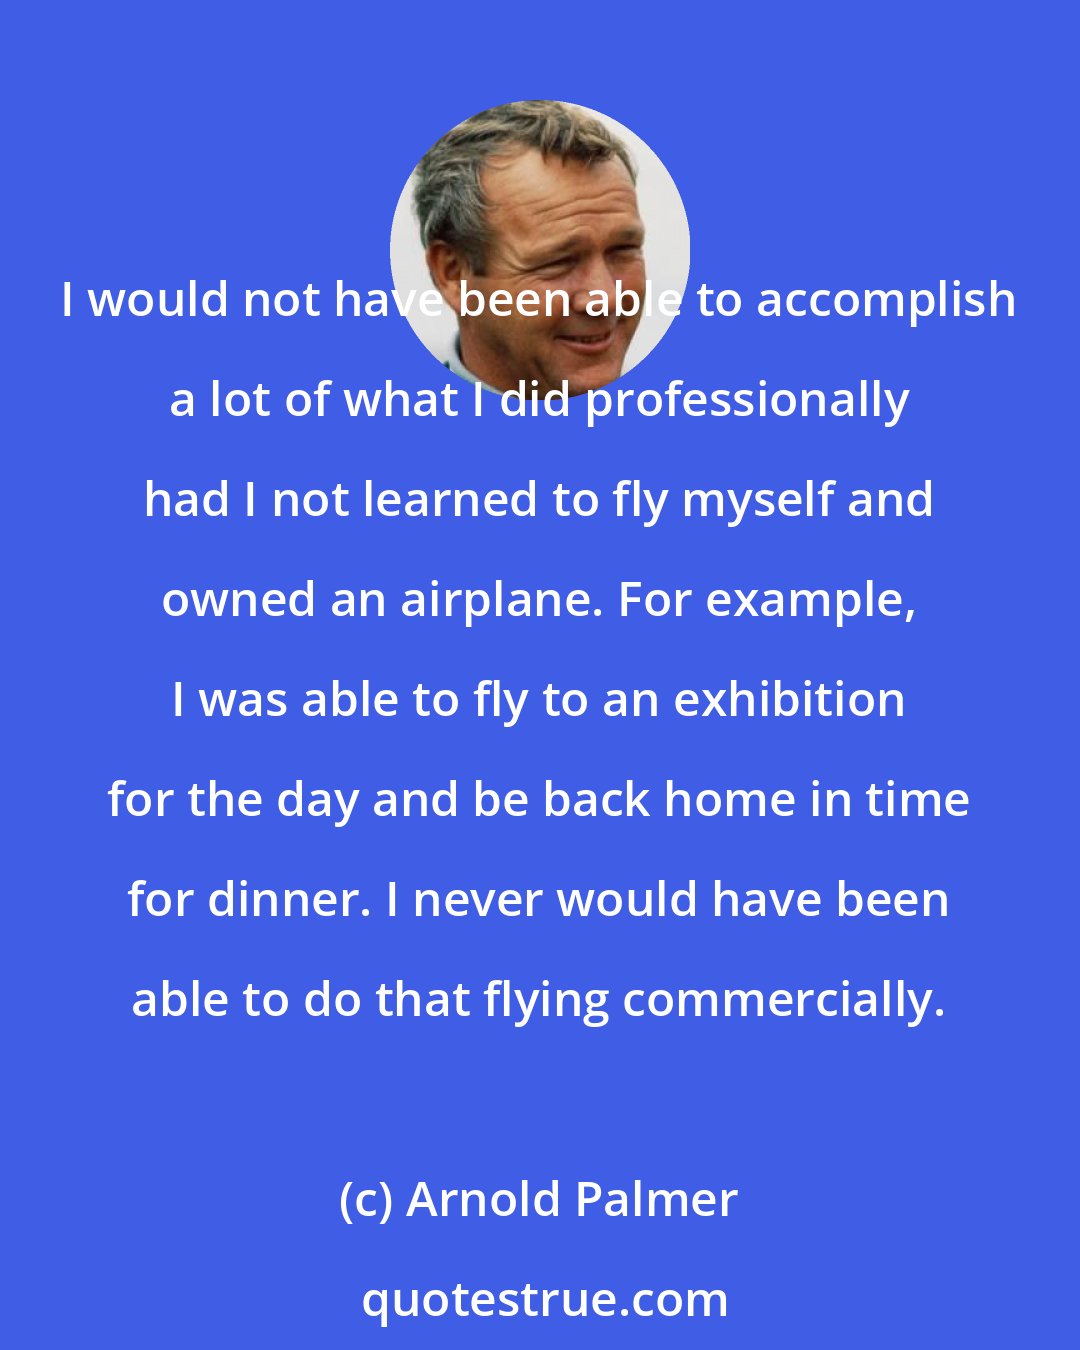 Arnold Palmer: I would not have been able to accomplish a lot of what I did professionally had I not learned to fly myself and owned an airplane. For example, I was able to fly to an exhibition for the day and be back home in time for dinner. I never would have been able to do that flying commercially.